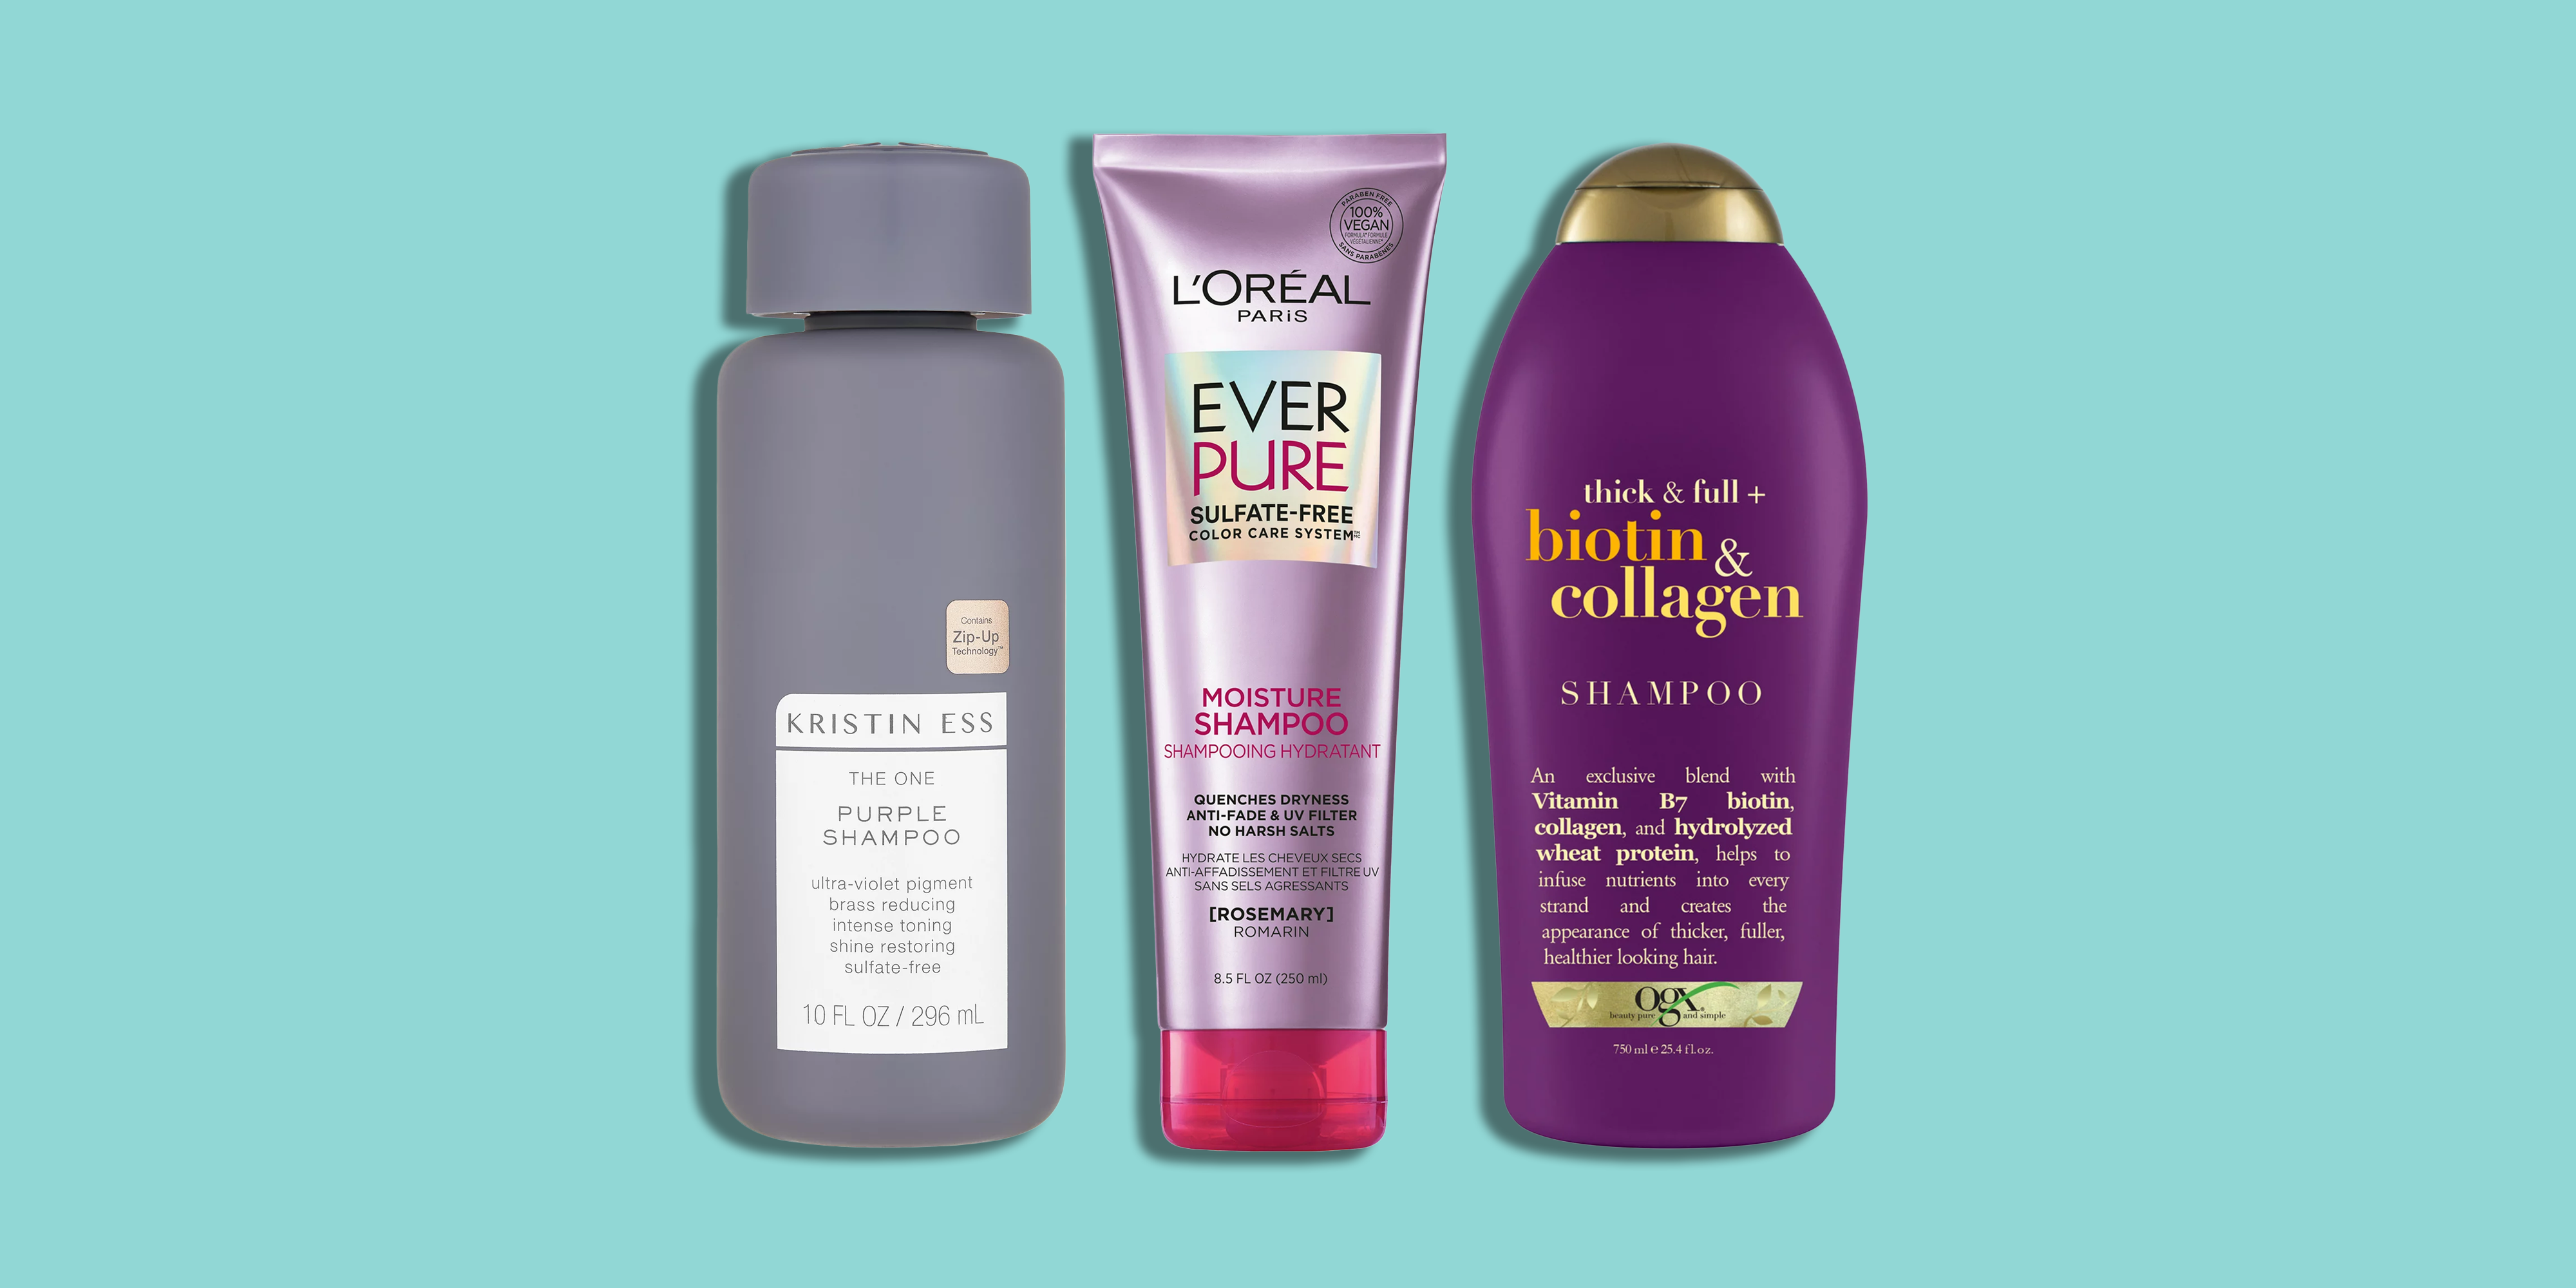 11 best dermatologistrecommended products for hair growth